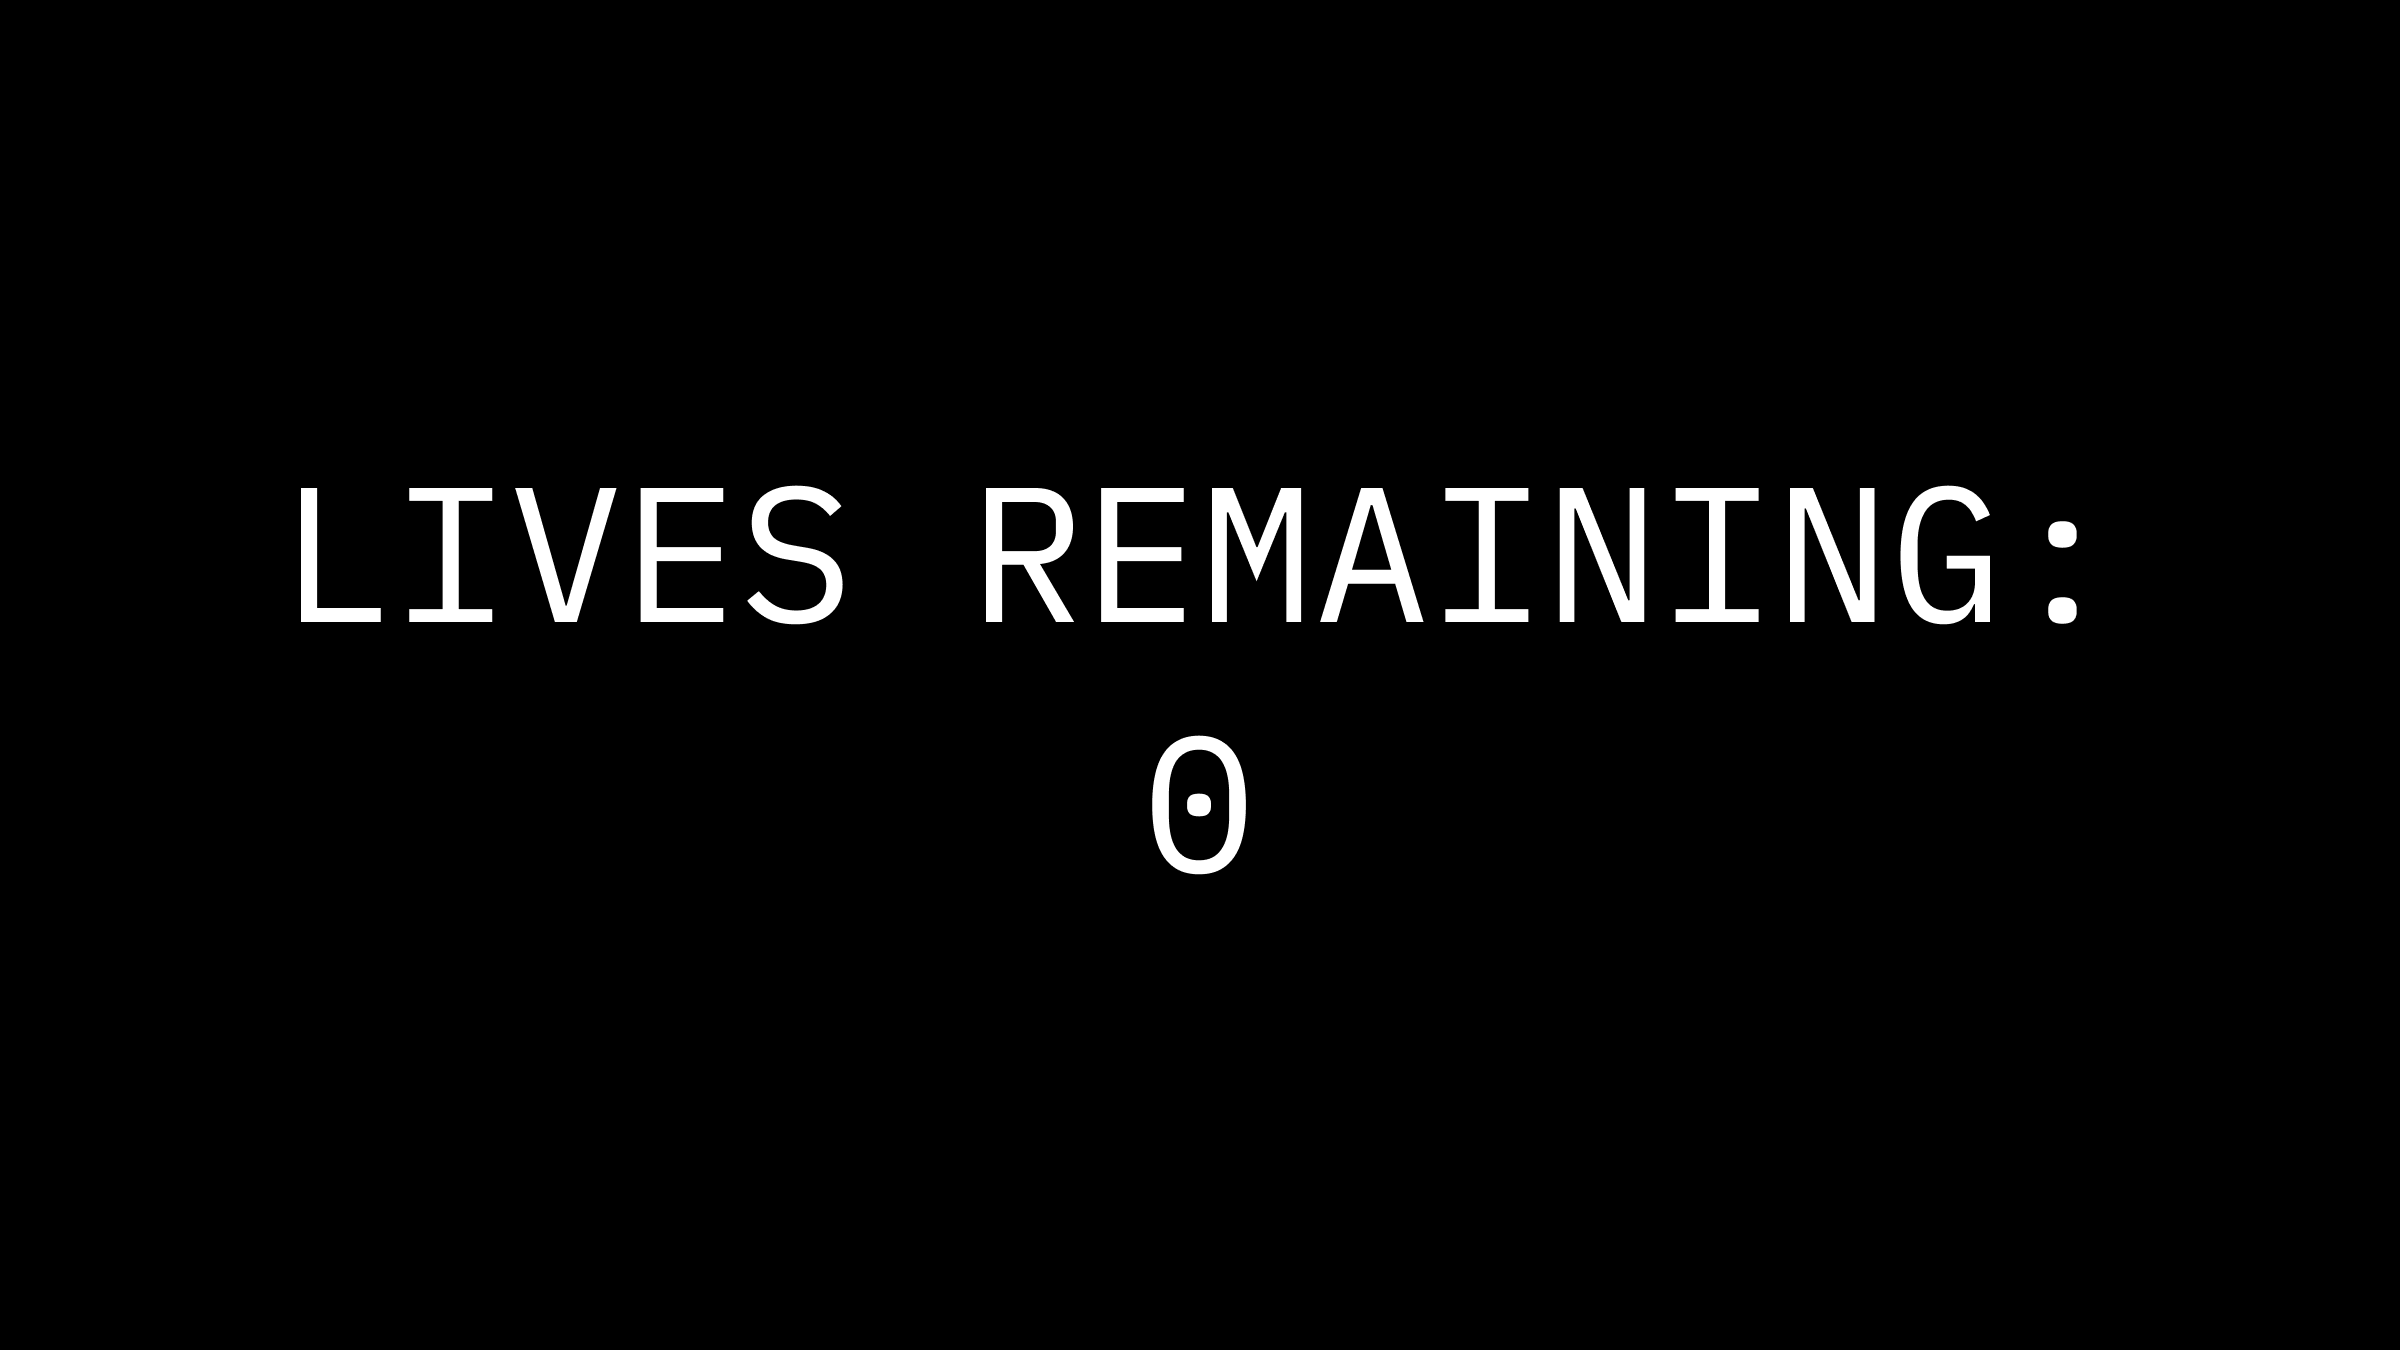 "Lives Remaining: 0"